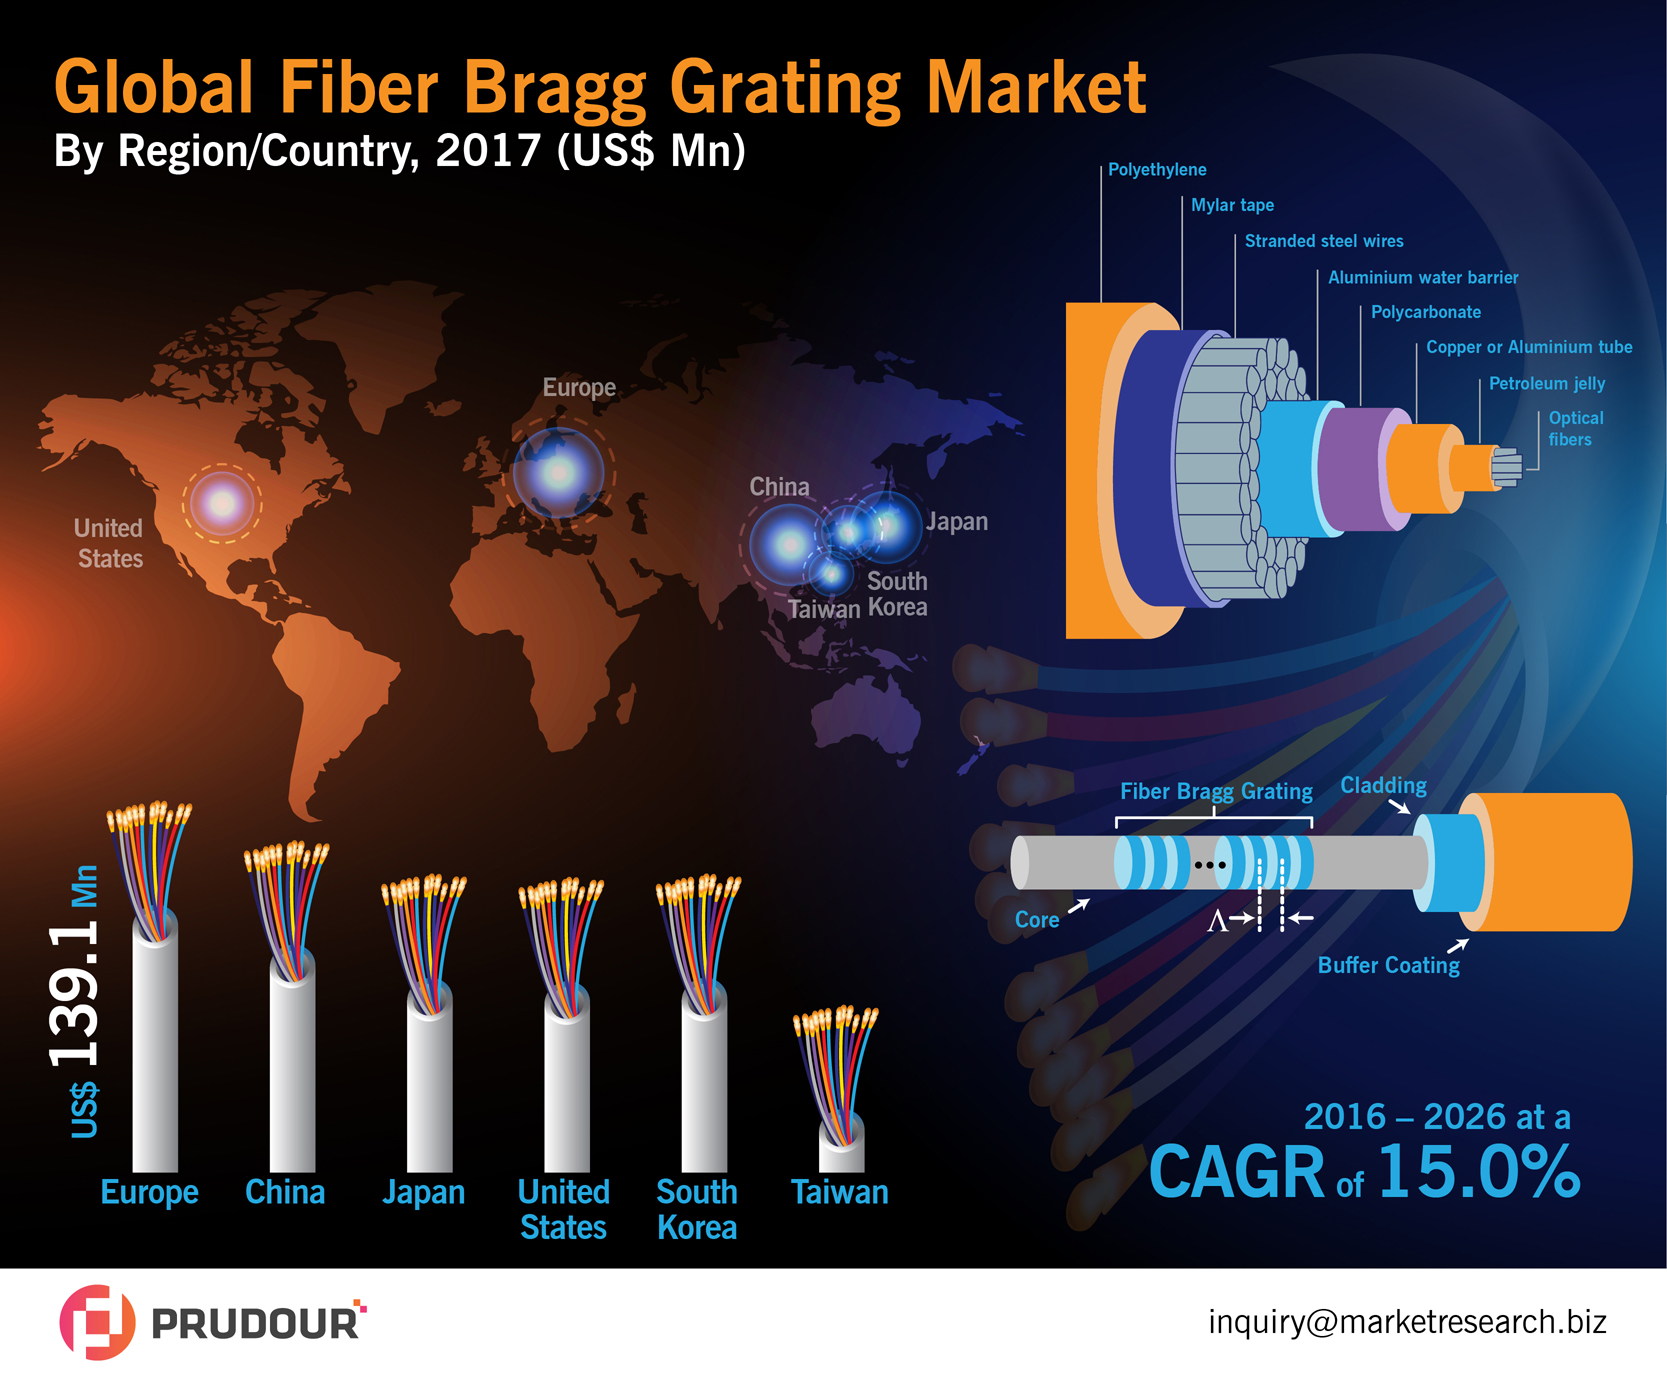 Worldwide Fiber Bragg Grating Market Is Expected To Reach US$ 3.8 Bn in 2026